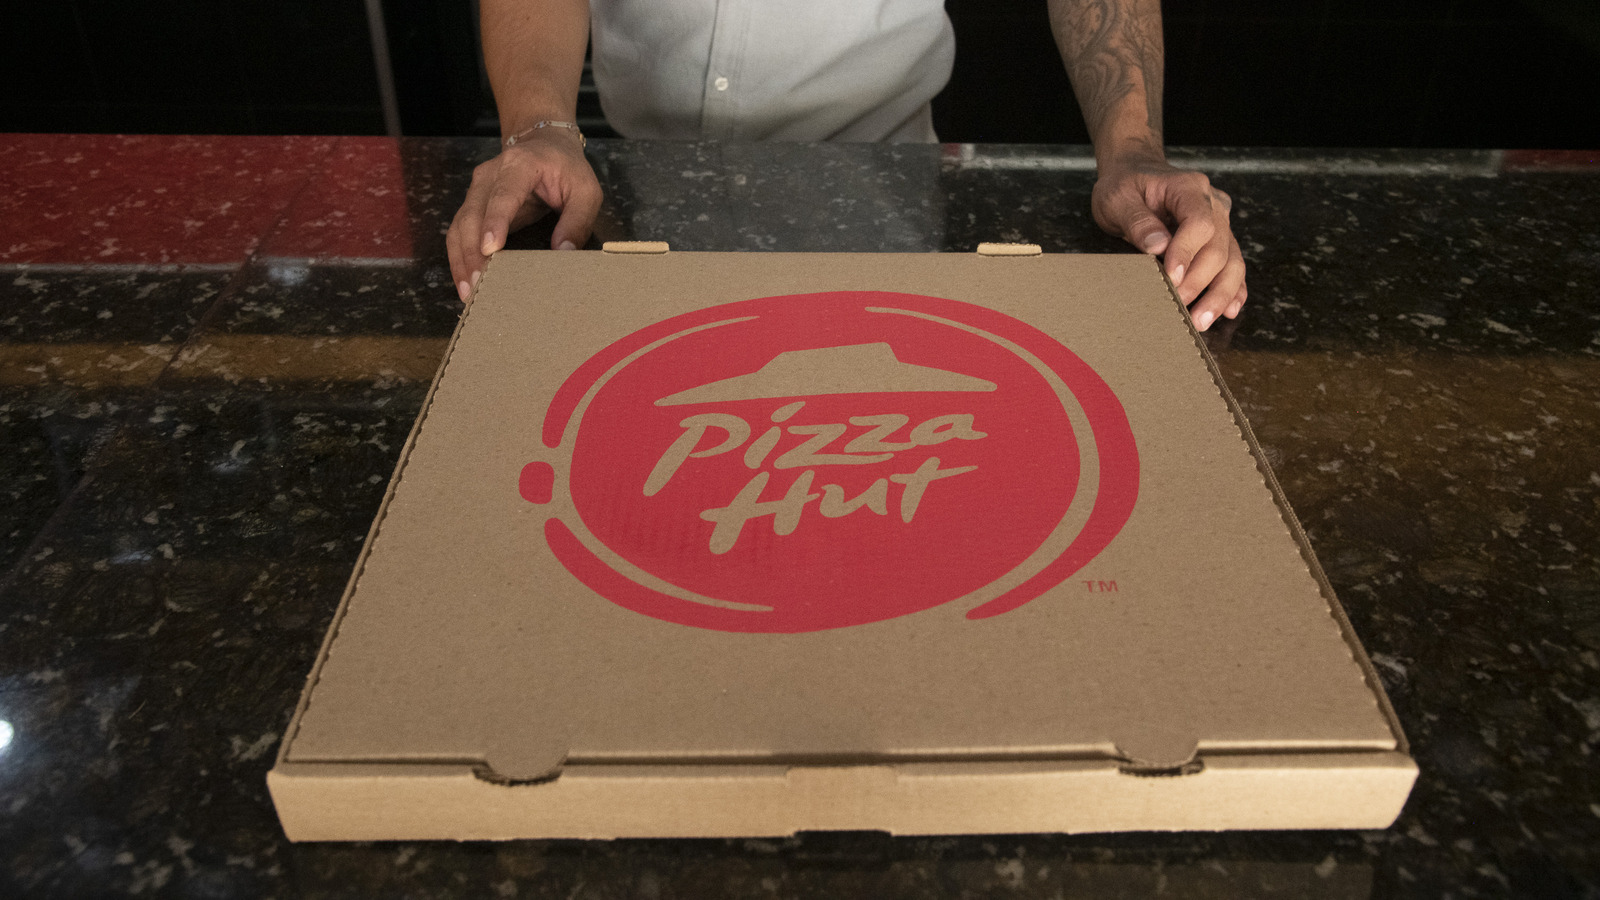 Pizza Hut Brings Back Cardboard Pizza Dresser For The Holidays